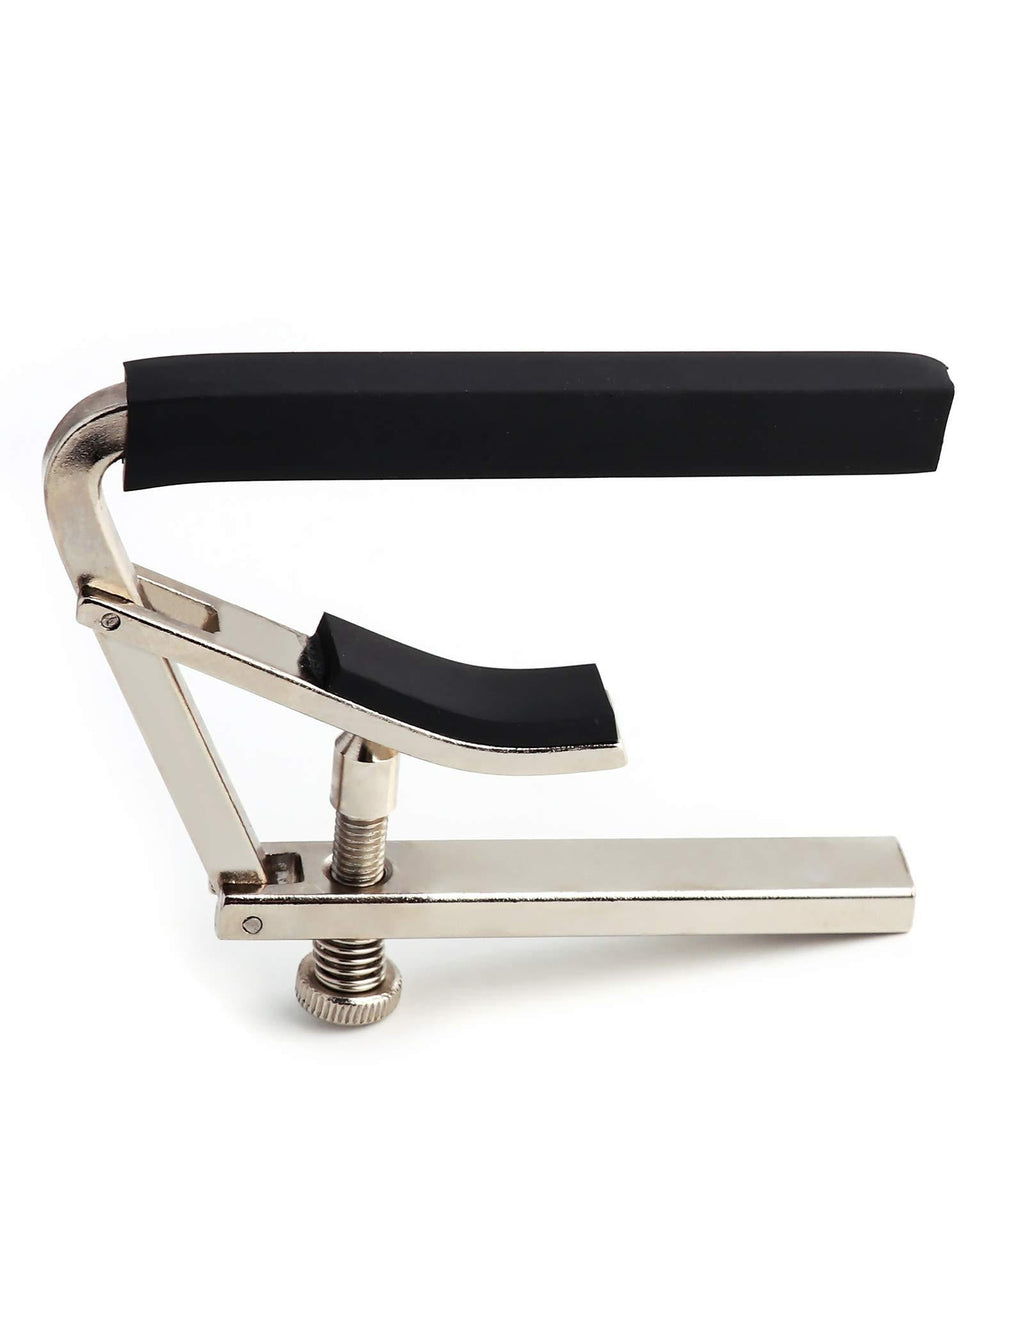 Holmer Guitar Capo Steel String Capo with Base Supporting for Classical Guitar and the Flat Fingerboard Musical Instrument etc.